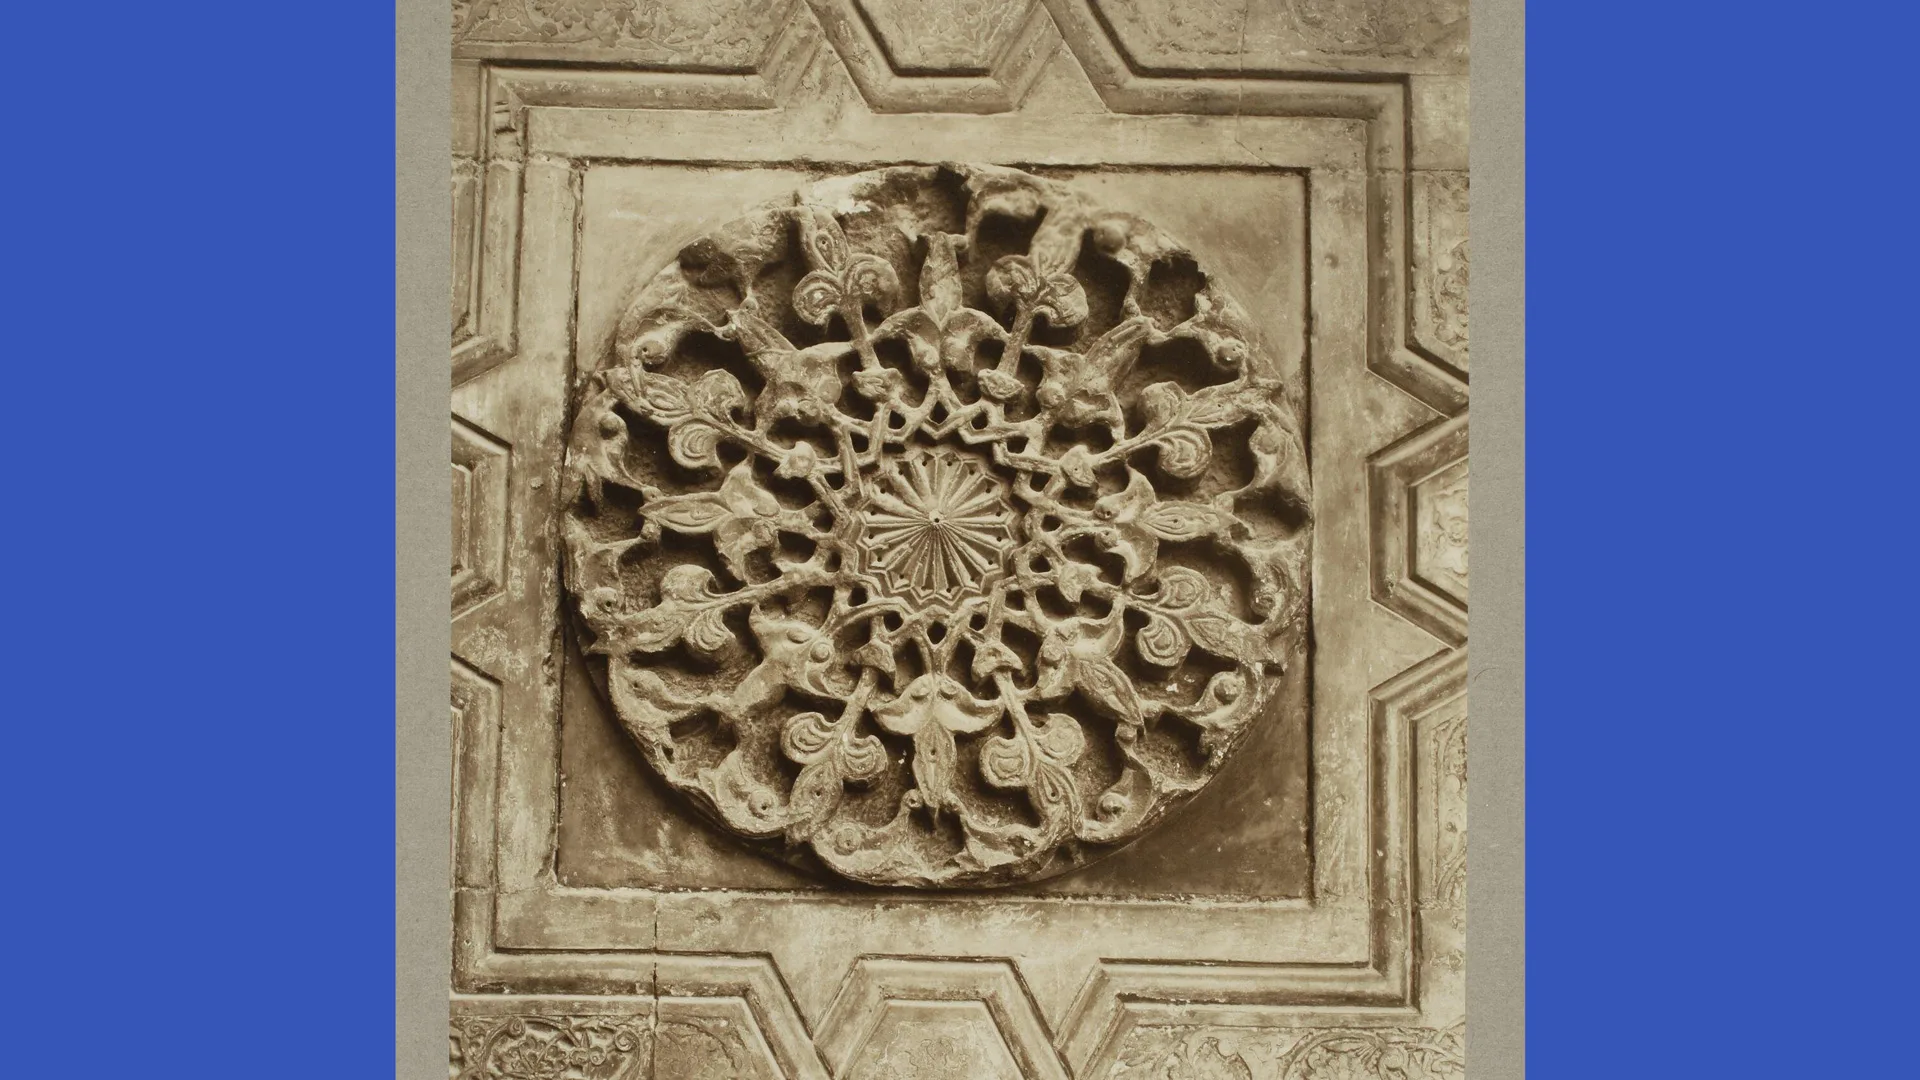 A photograph of an ornate stone structure panel that would have been on a doorway in India with blue borders